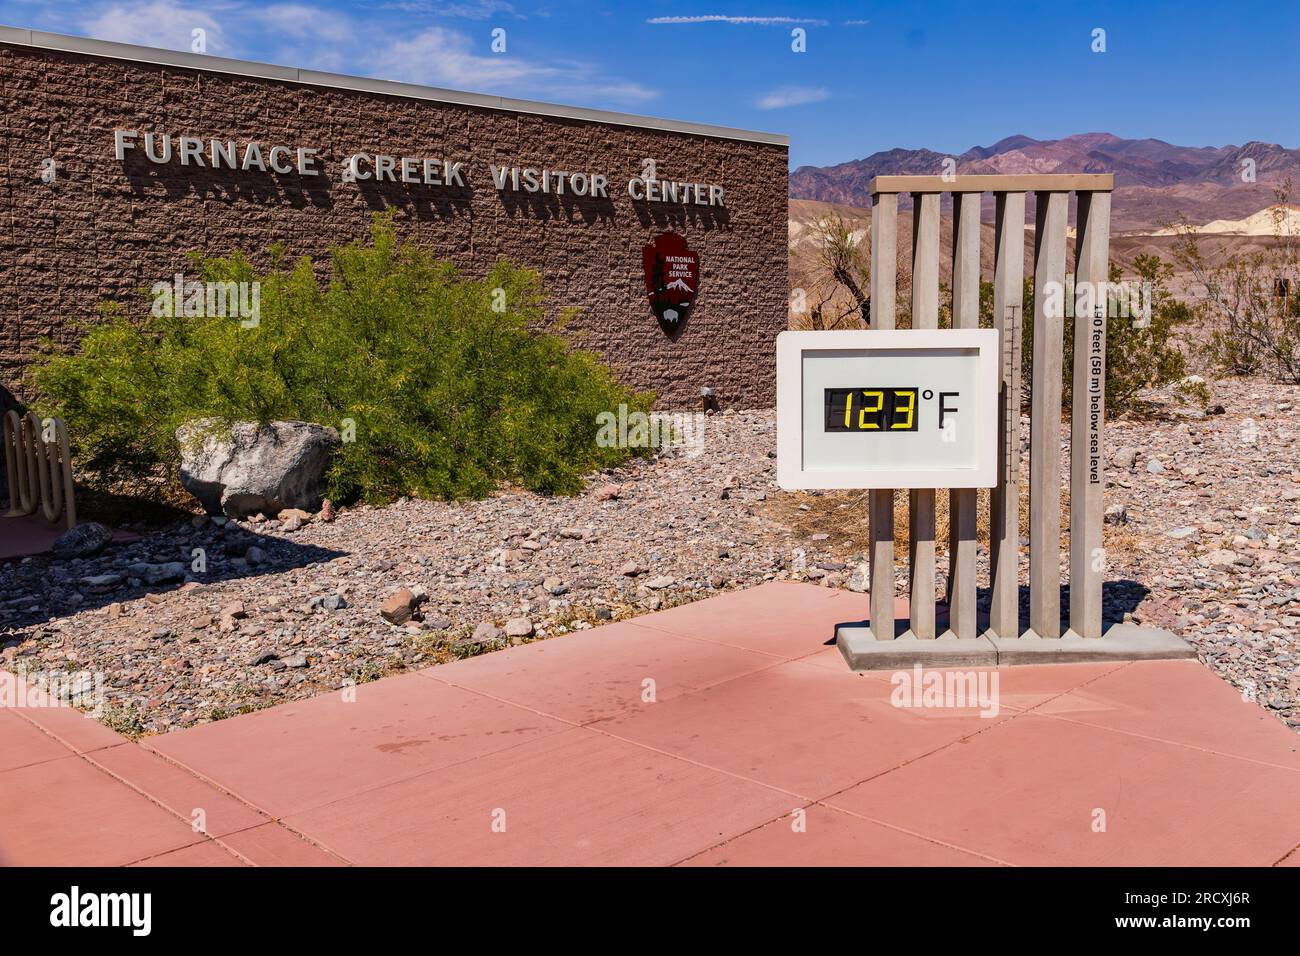 Blazing heat and heat wave with extreme temperatures at famous Furnace Creek thermometer in Death Valley, United States Stock Photo